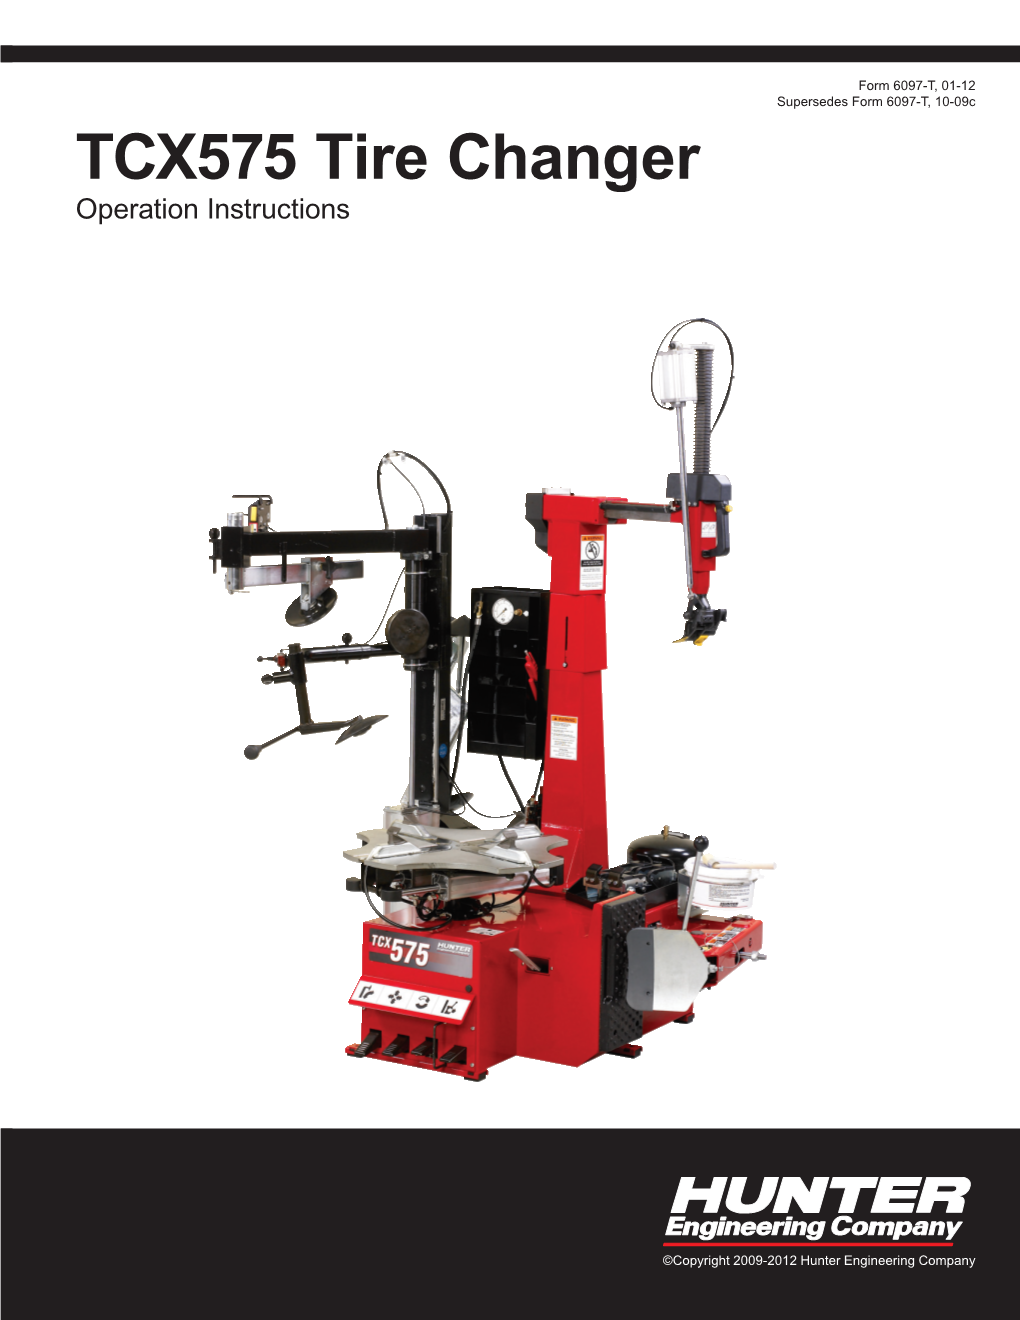 TCX575 Tire Changer Operation Instructions